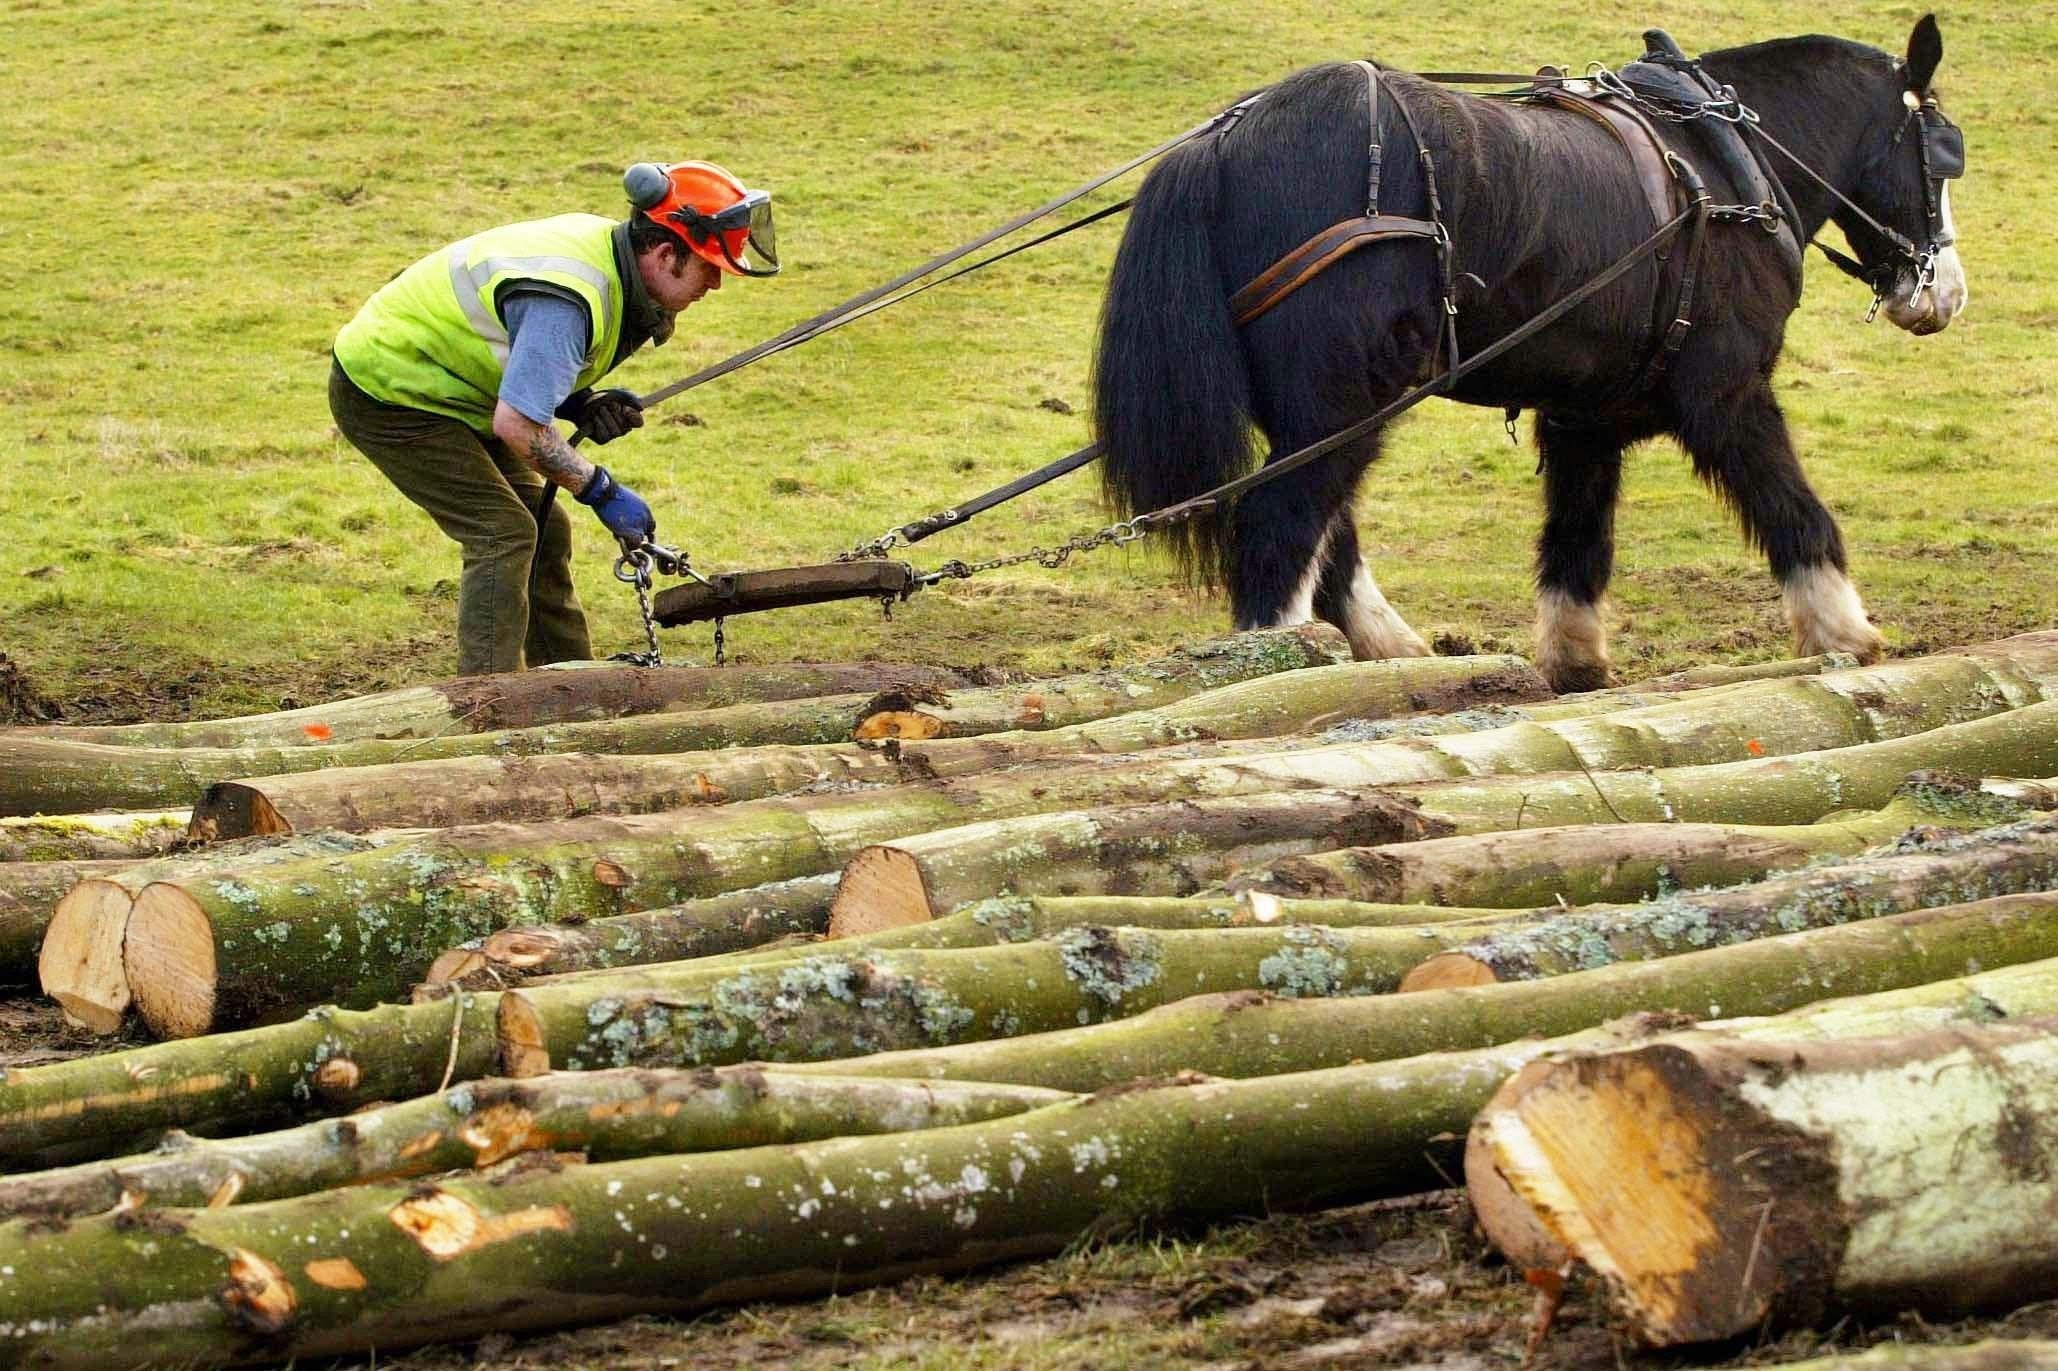 Heavy horses like this Clydesdale, Dandy, seen here with logger Graham Gilmour, have been described as 'working class heroes'